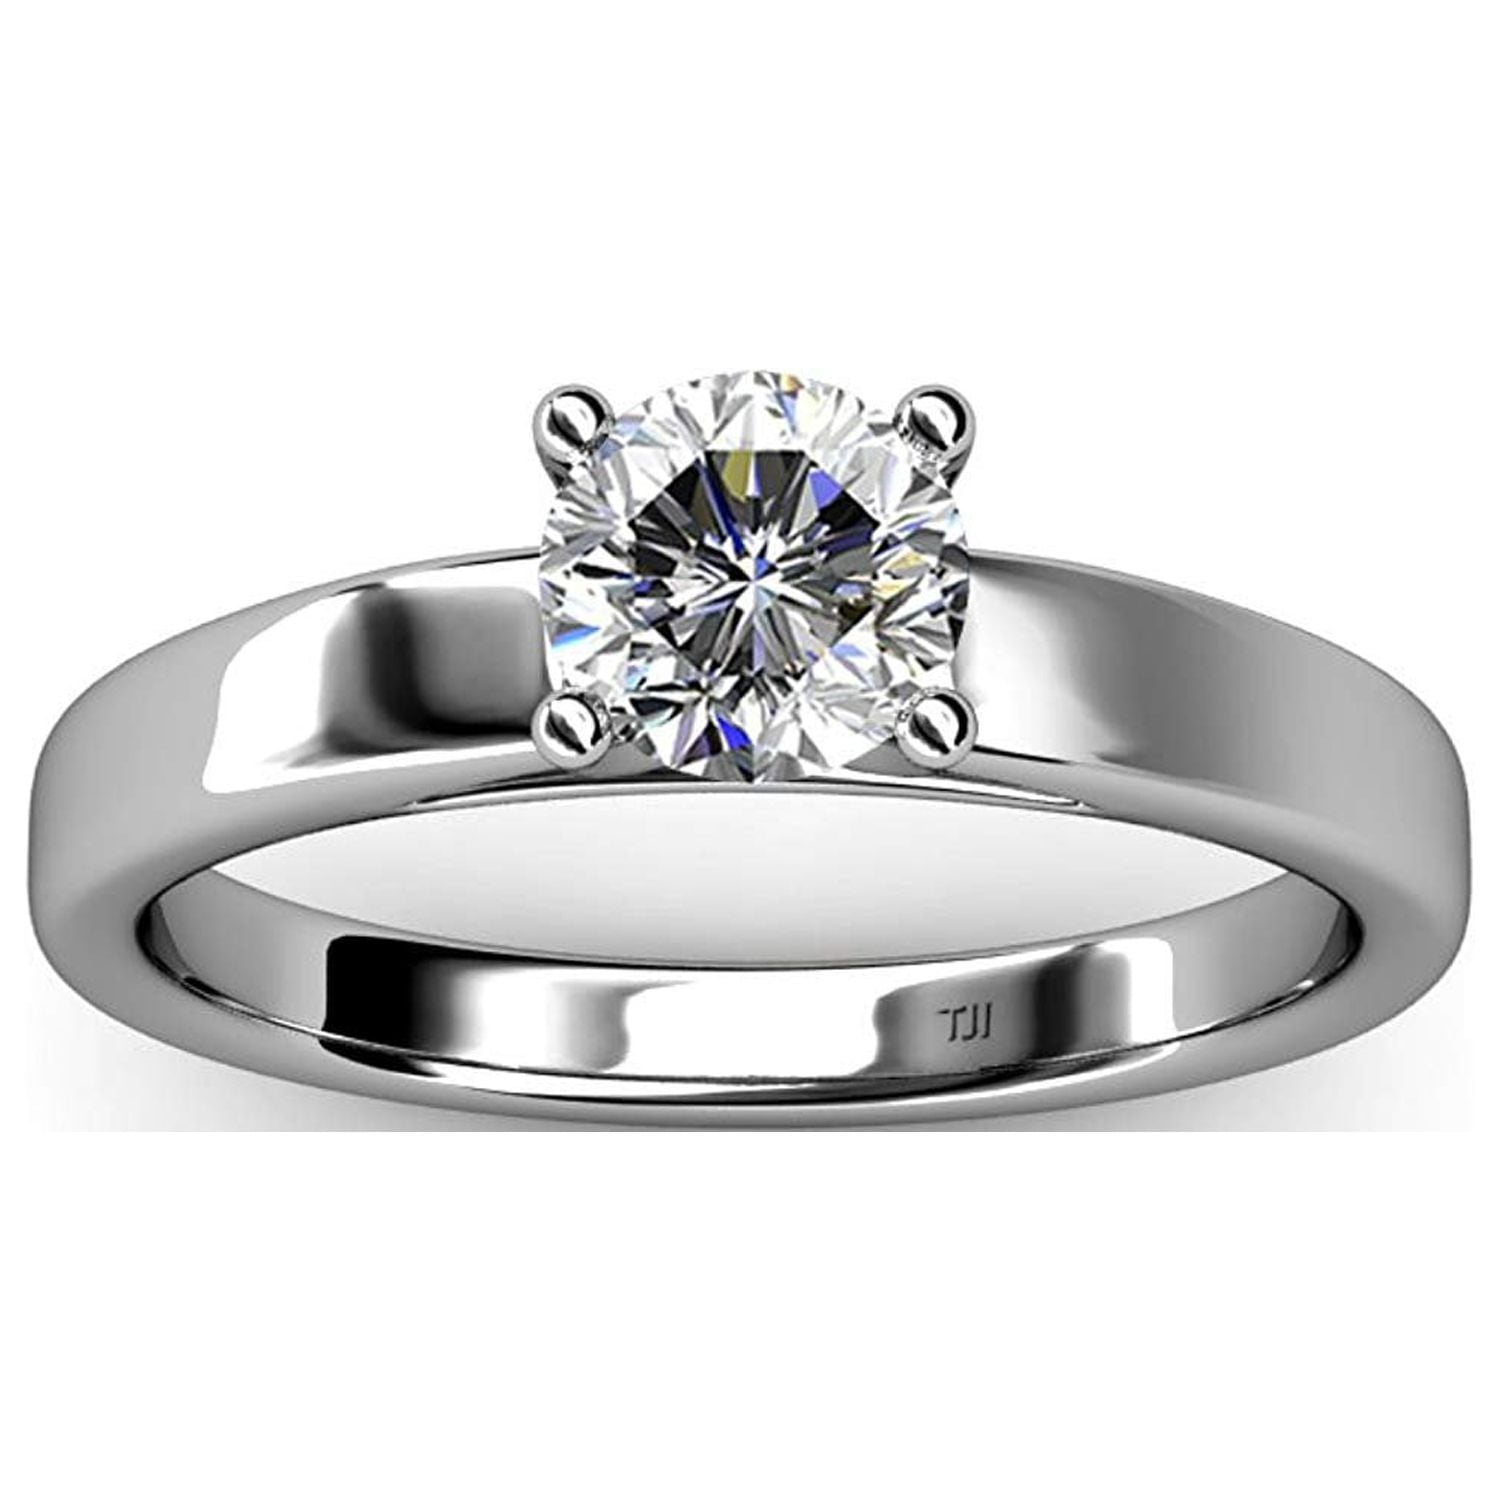 Six Prong Channel Set Diamond Engagement Ring in Yellow Gold